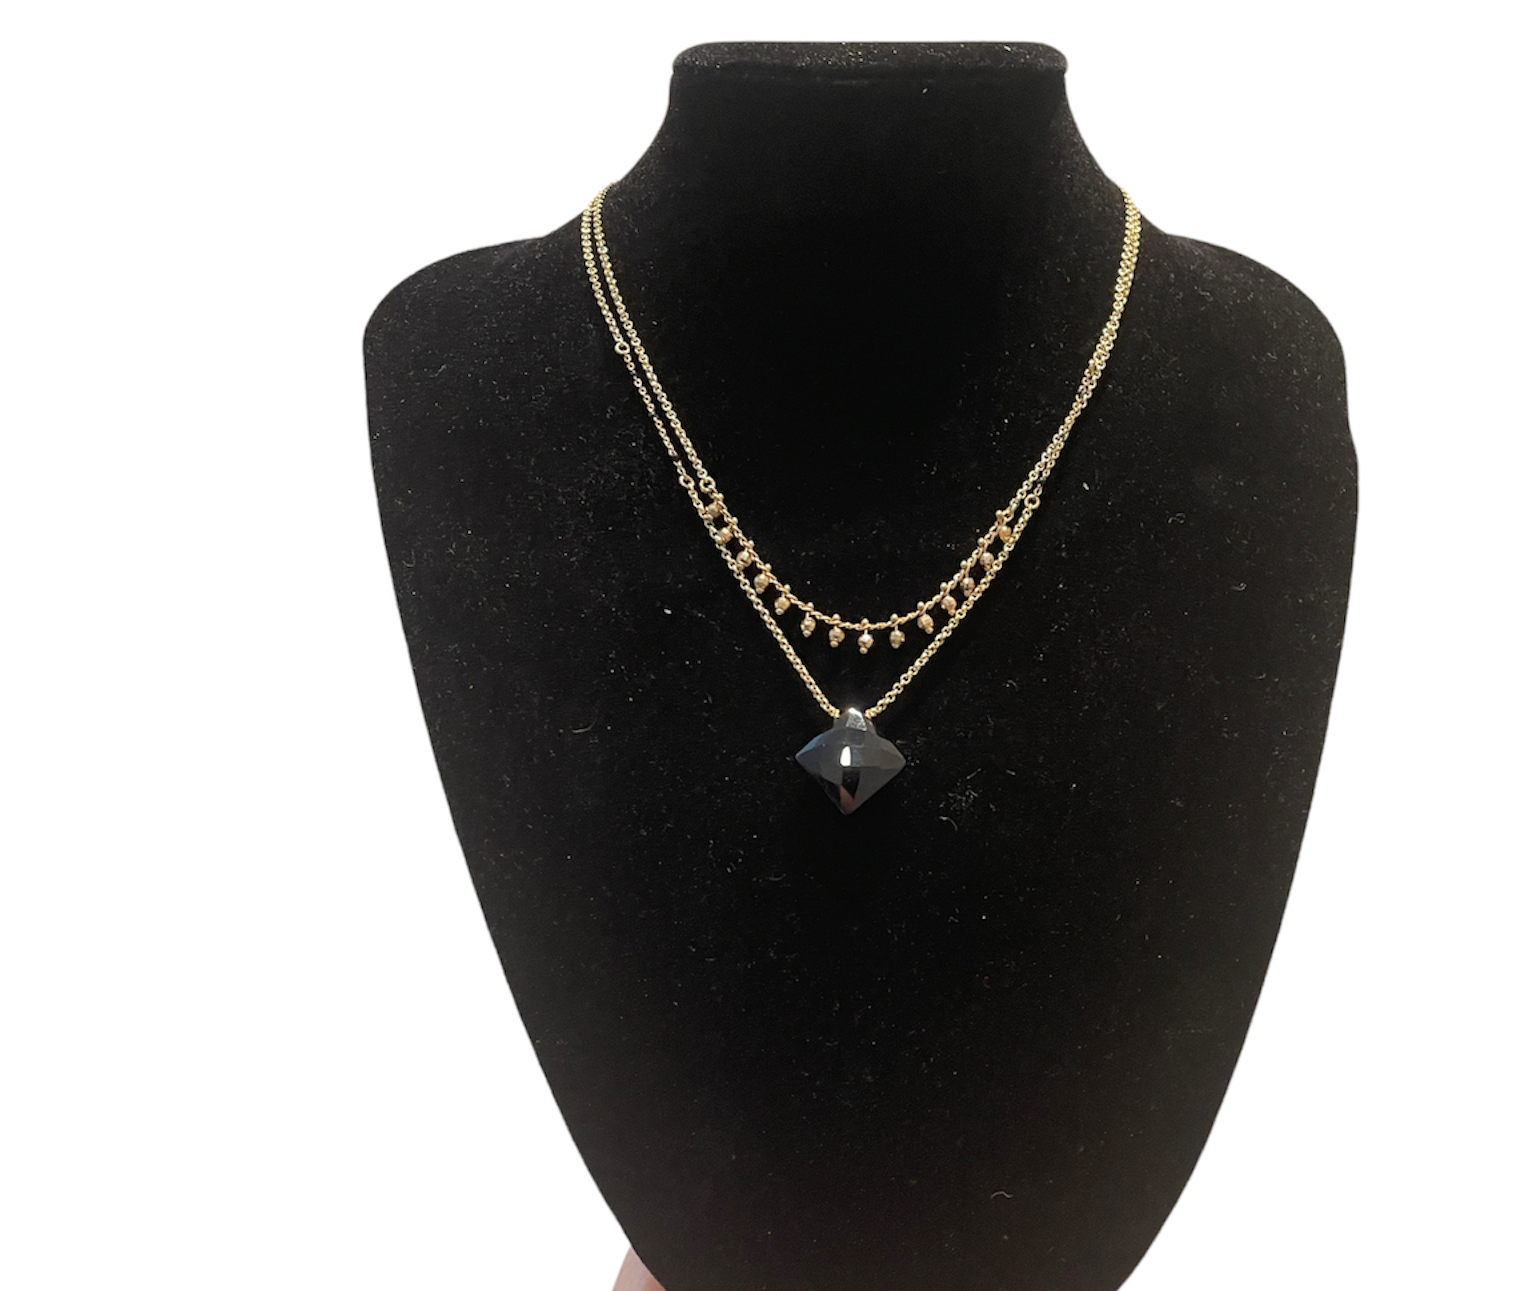 Handmade Modern Black Onyx Gold-plated Layered Necklace